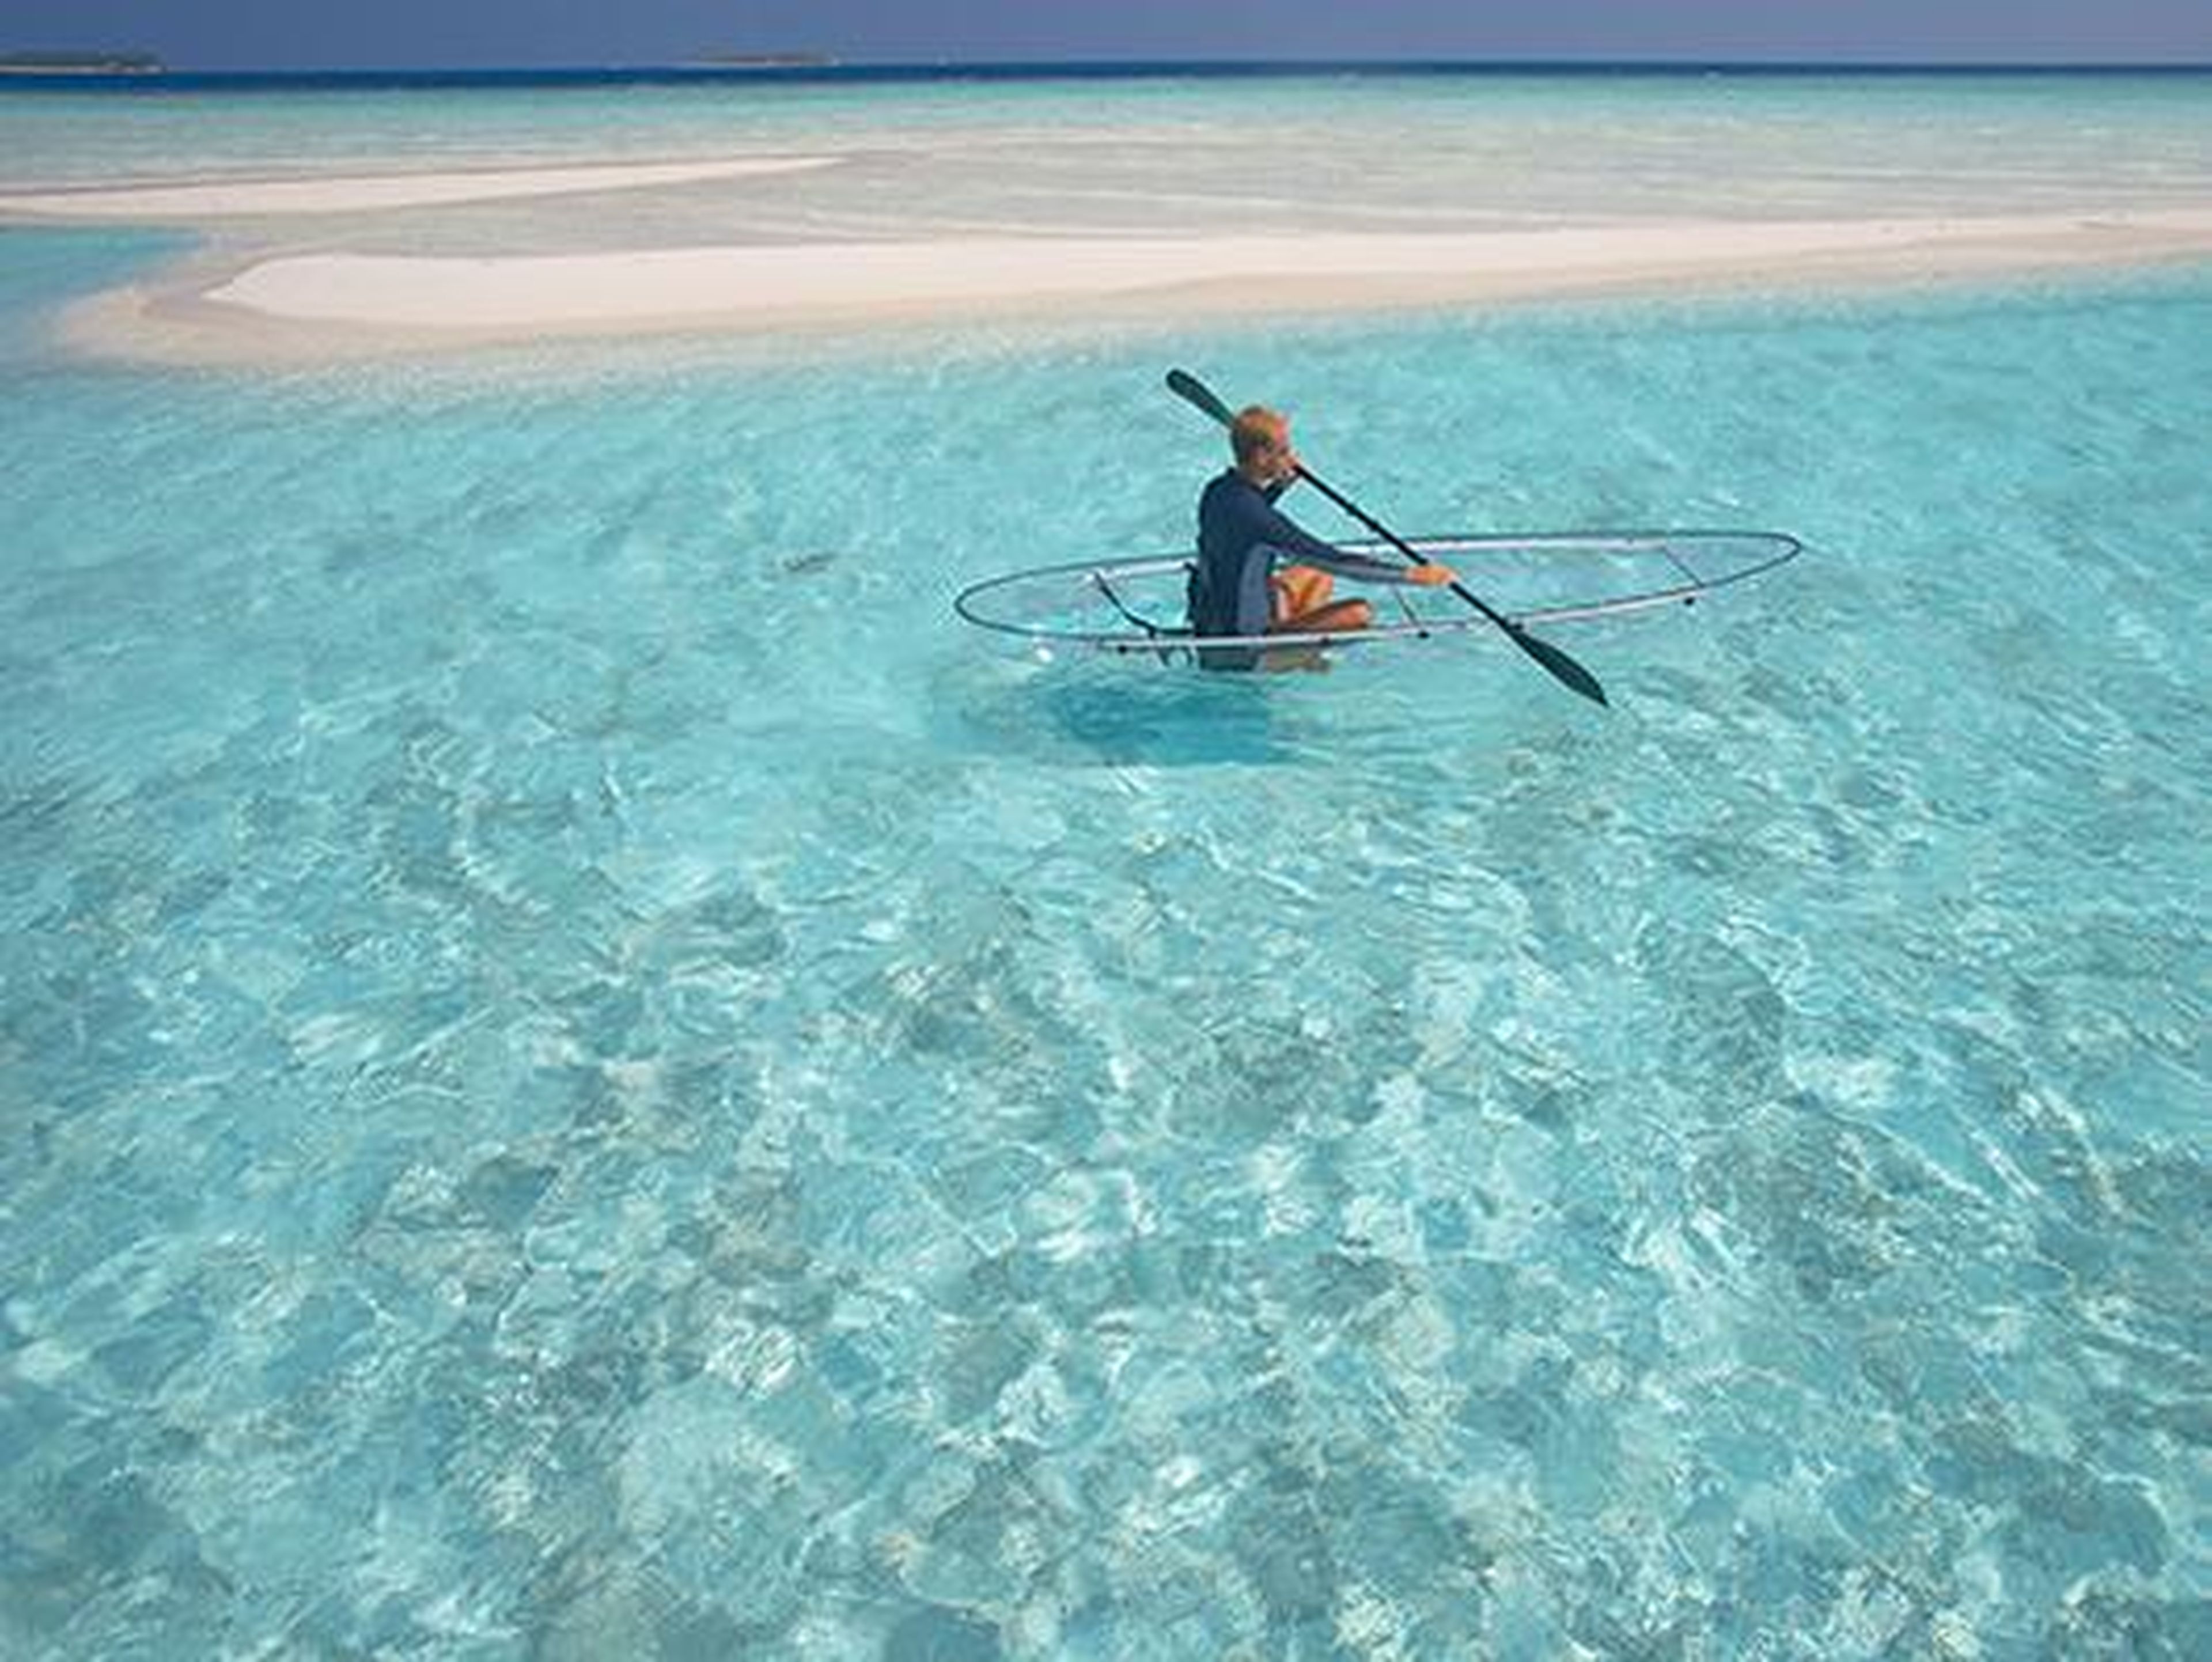 ... and paddling the clear blue waters in a translucent canoe.